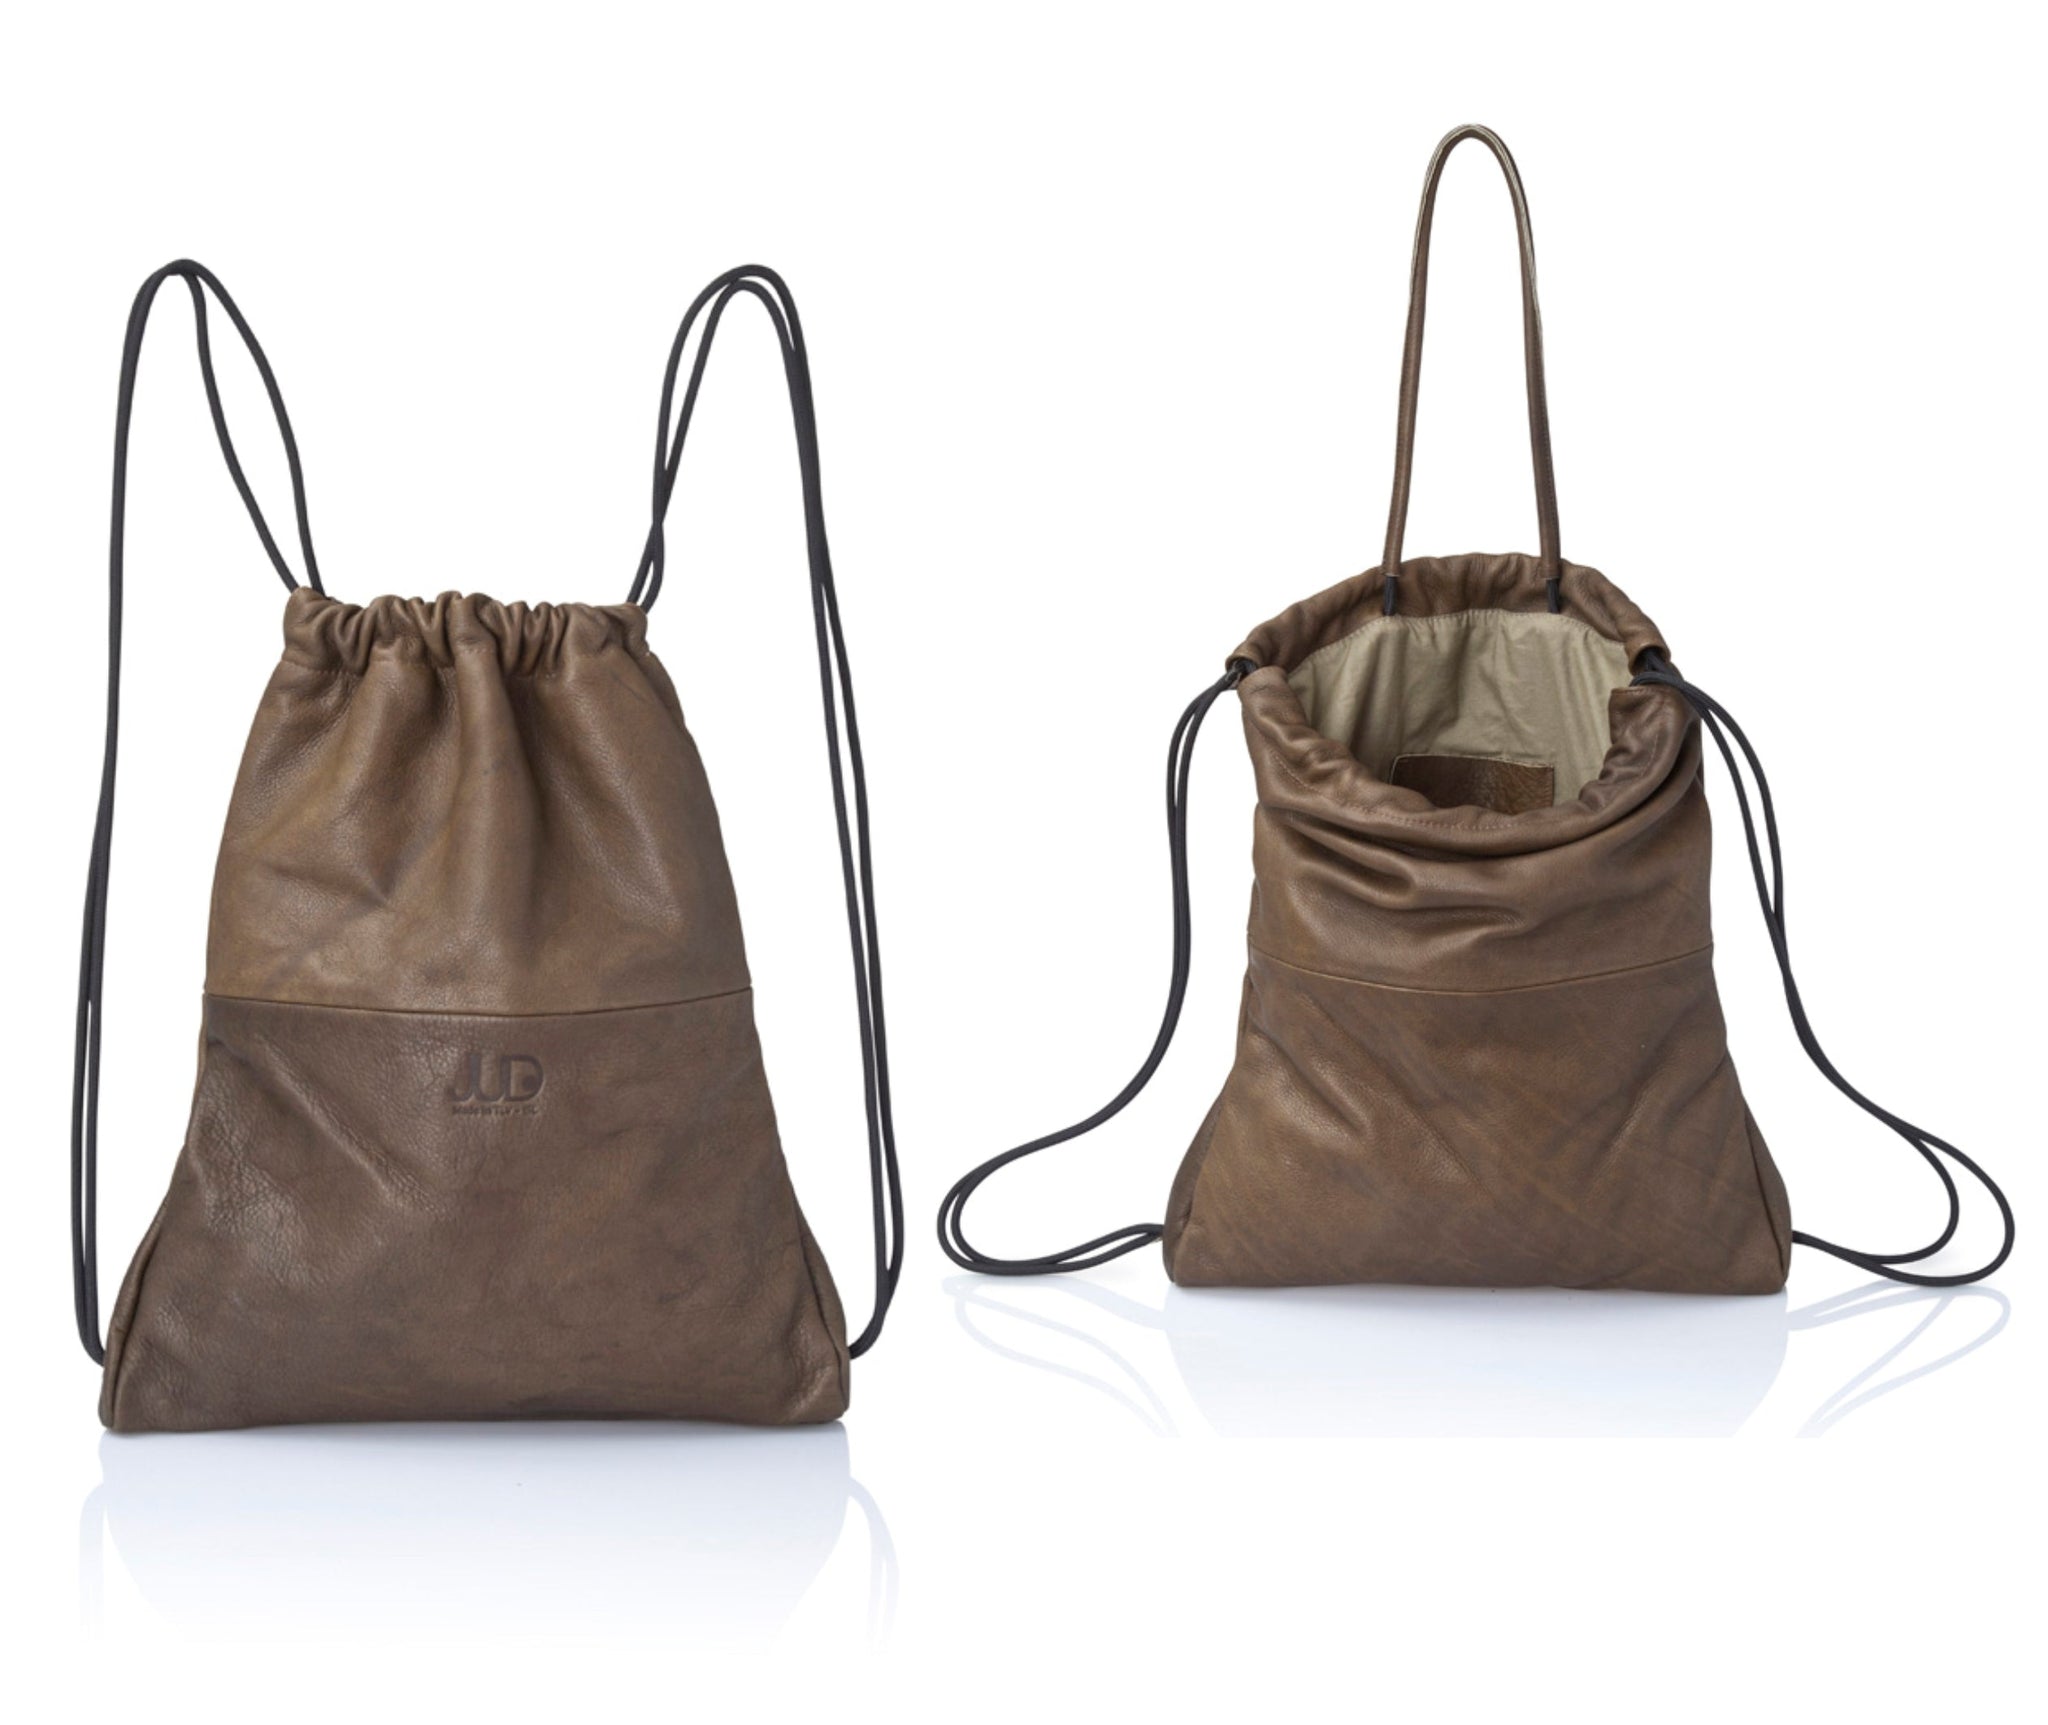 Multi-way leather drawstring backpack crafted with soft Italian Napa leather, adjustable back straps, and leather-covered inner top handles. This style is versatile and can be carried as a backpack, tote, or on the shoulder. Its ideal minimalist design is suitable for long active days & use. Suitable for laptops up to 15inc